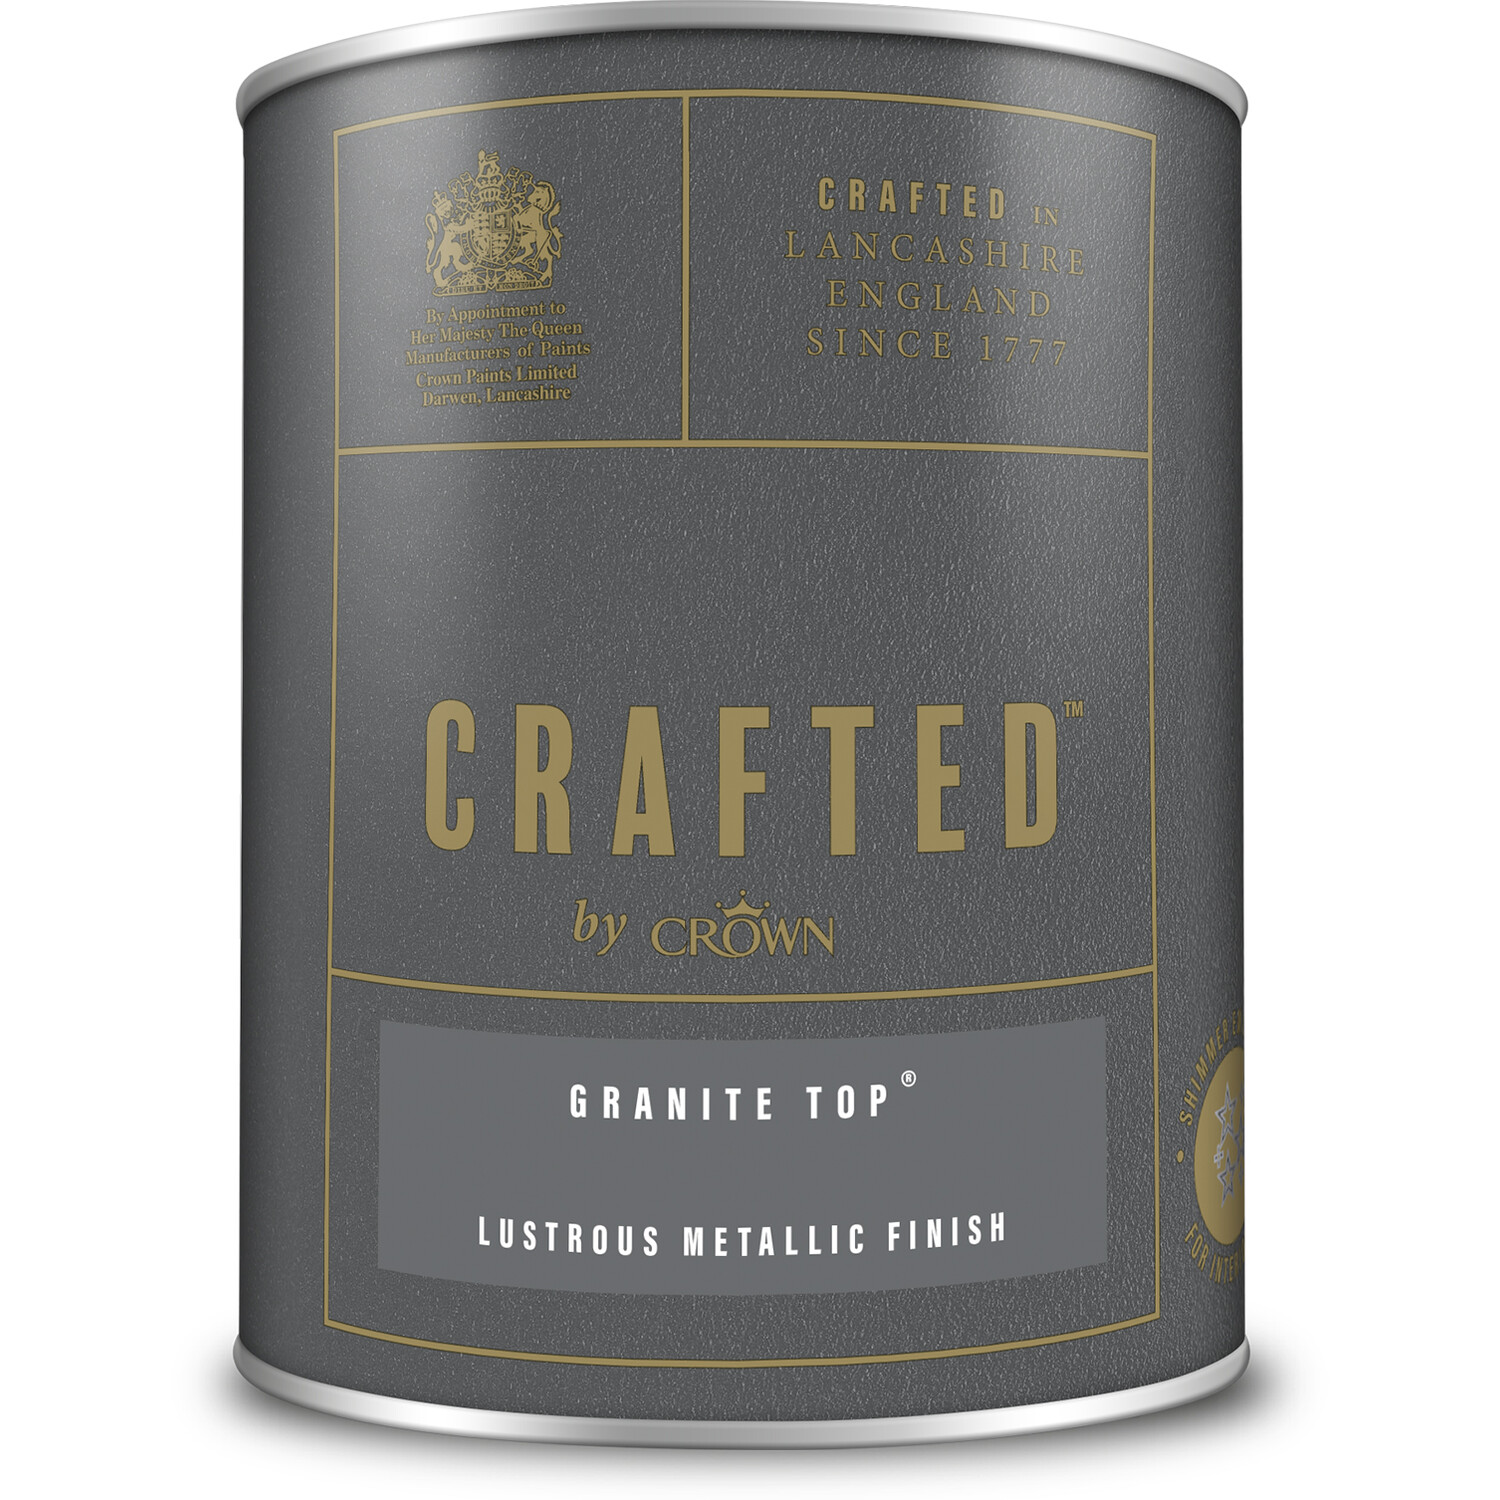 Crown Crafted Walls Wood and Metal Granite Top Lustrous Metallic Shimmer Emulsion Paint 1.25L Image 2